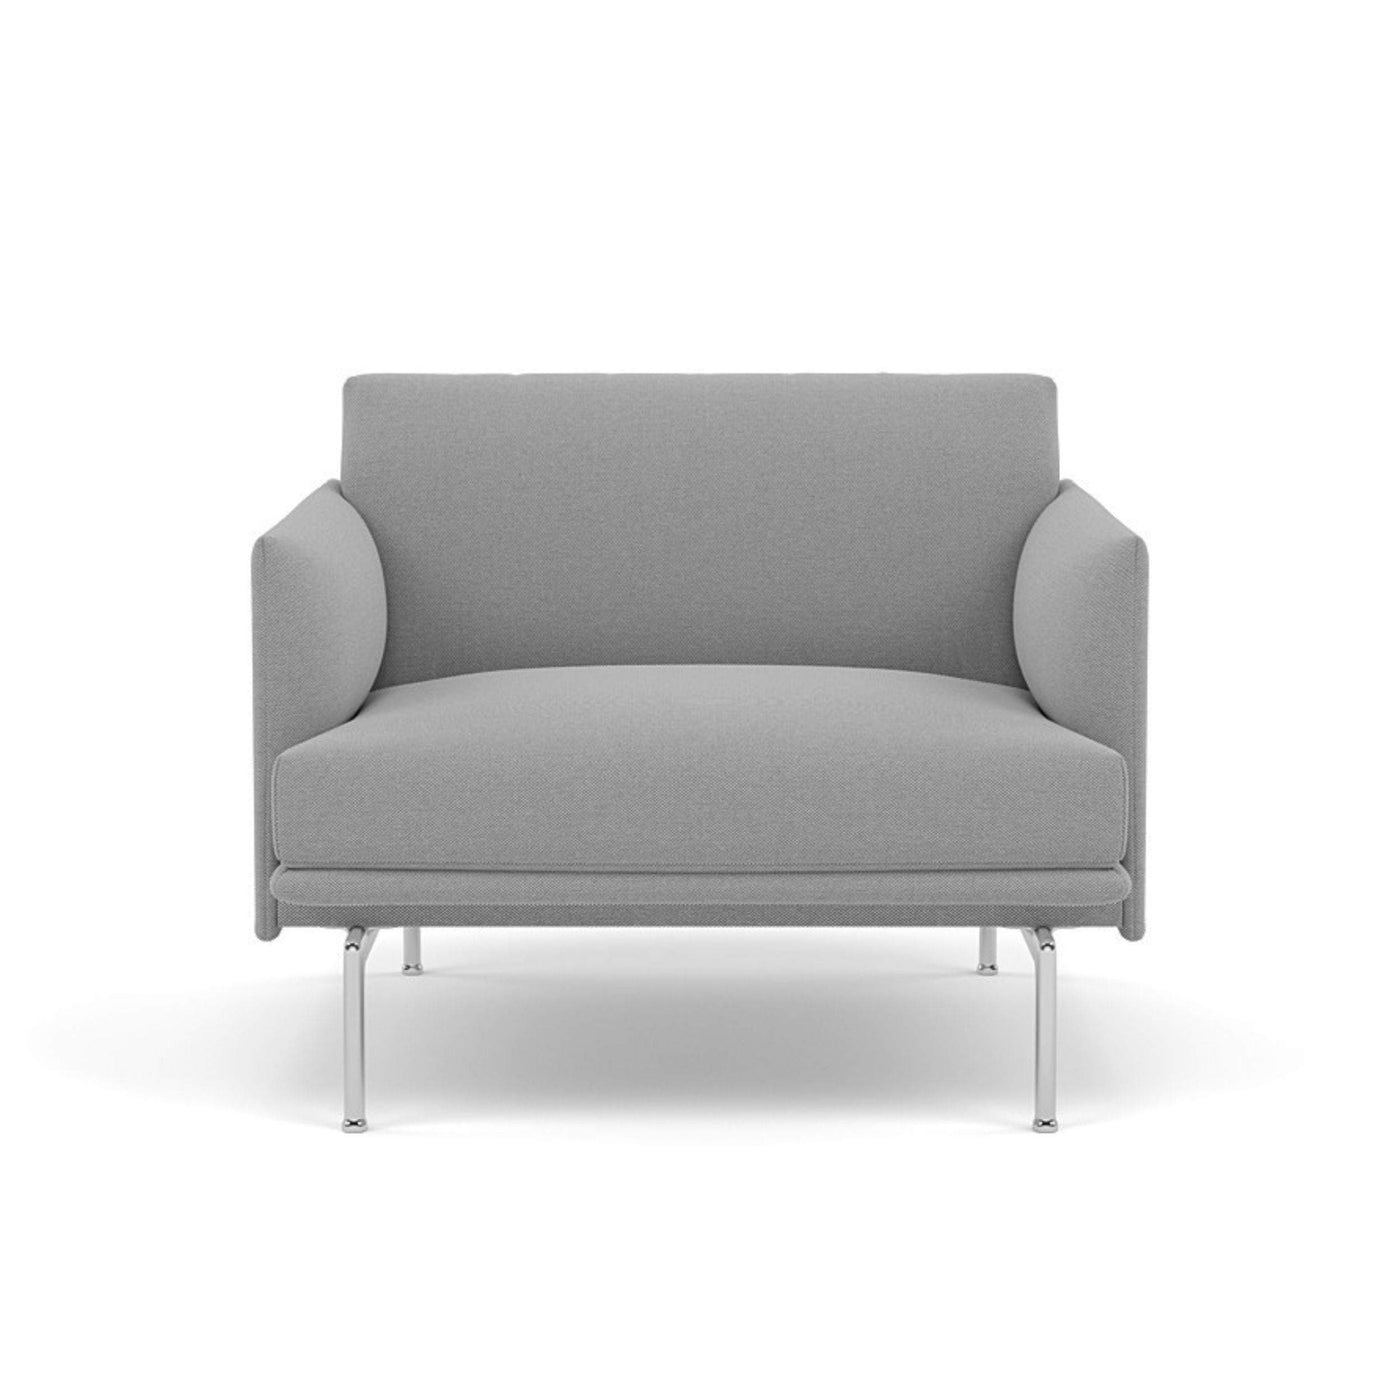 Muuto Outline Chair in Steelcut Trio 133 grey fabric. Made to order from someday designs. #colour_steelcut-trio-133